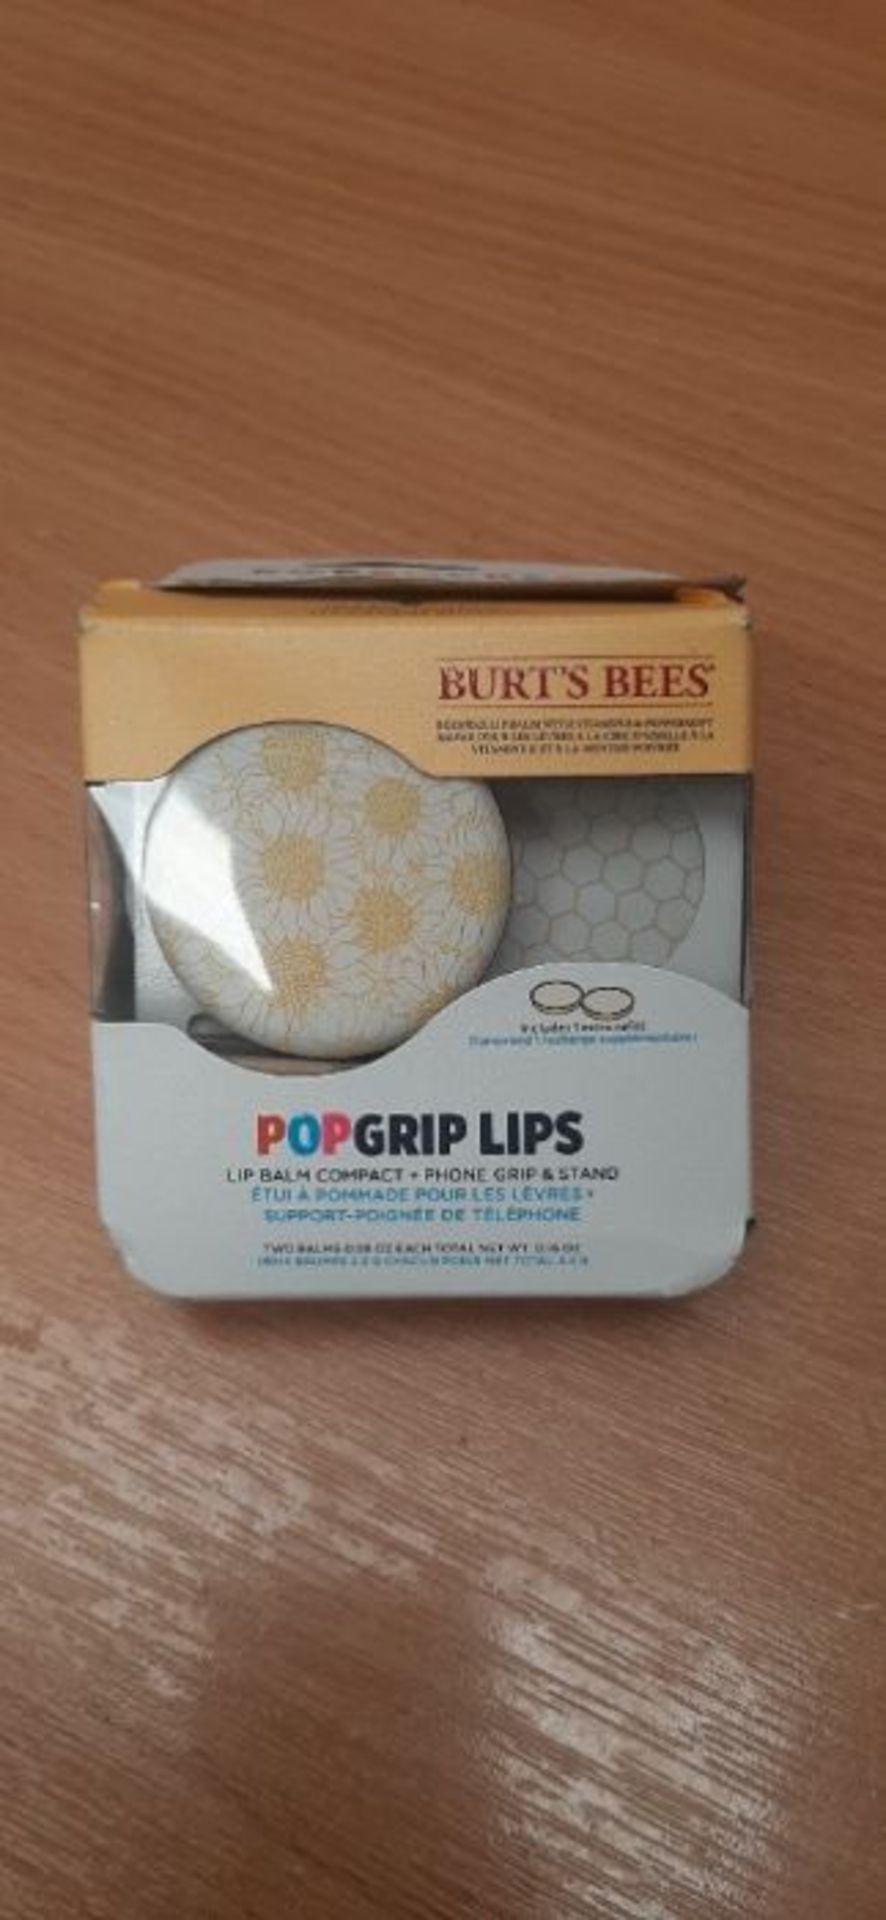 PopSockets: PopGrip Lips x Burt's Bees - Expanding Stand and Grip for Smartphones and - Image 2 of 2